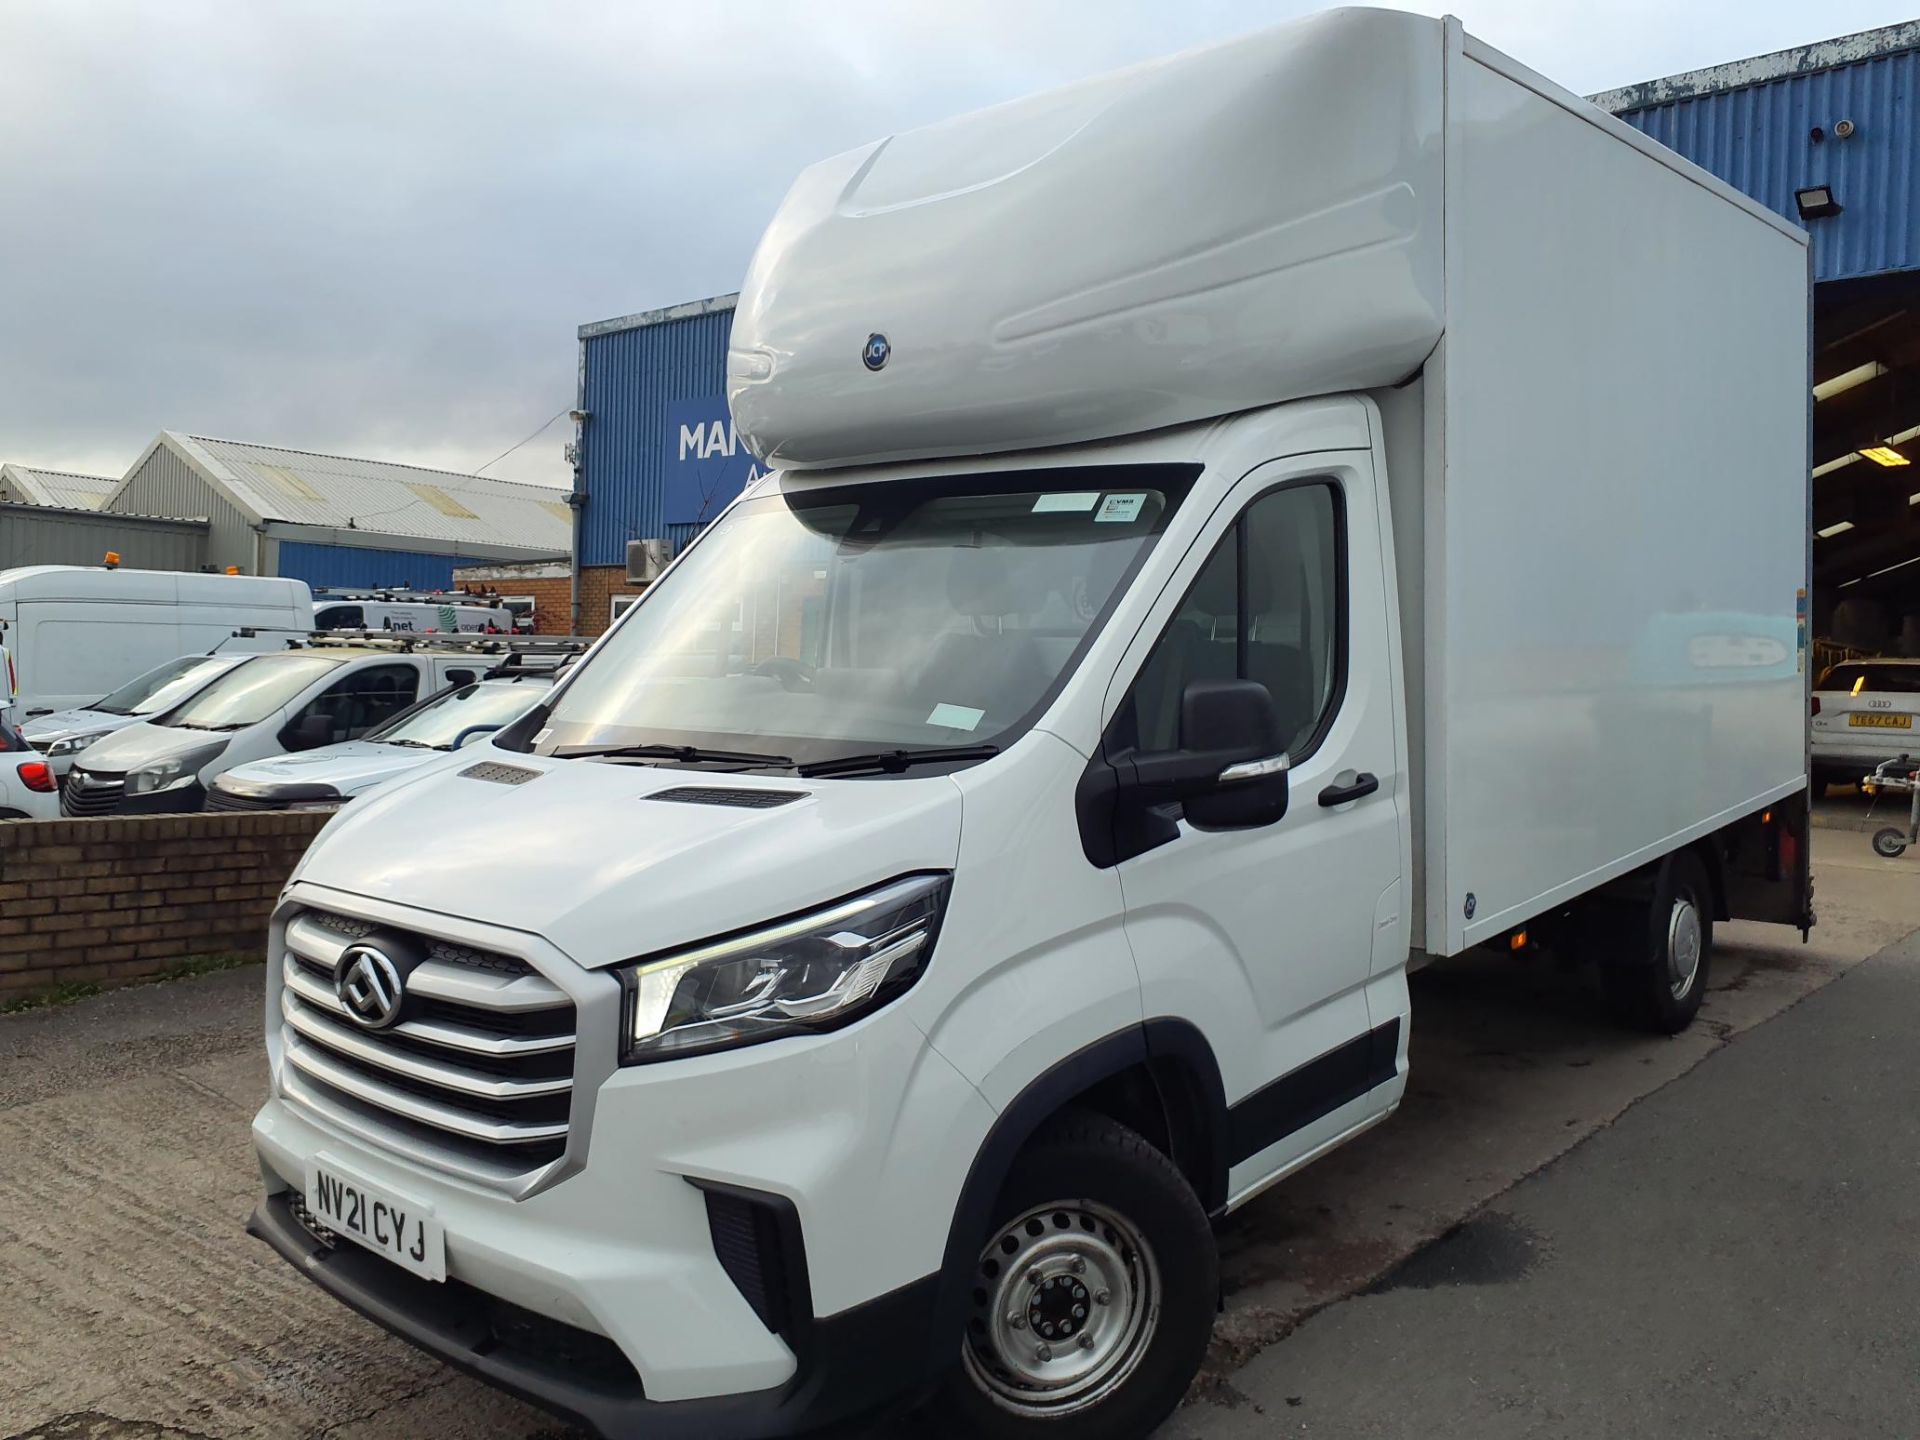 MAXUS DELIVER 2.0 D20 TURBO DIESEL LWB LUTON BOX VAN WITH ELECTRIC TAIL LIFT -21 REG ONLY 53K MILES